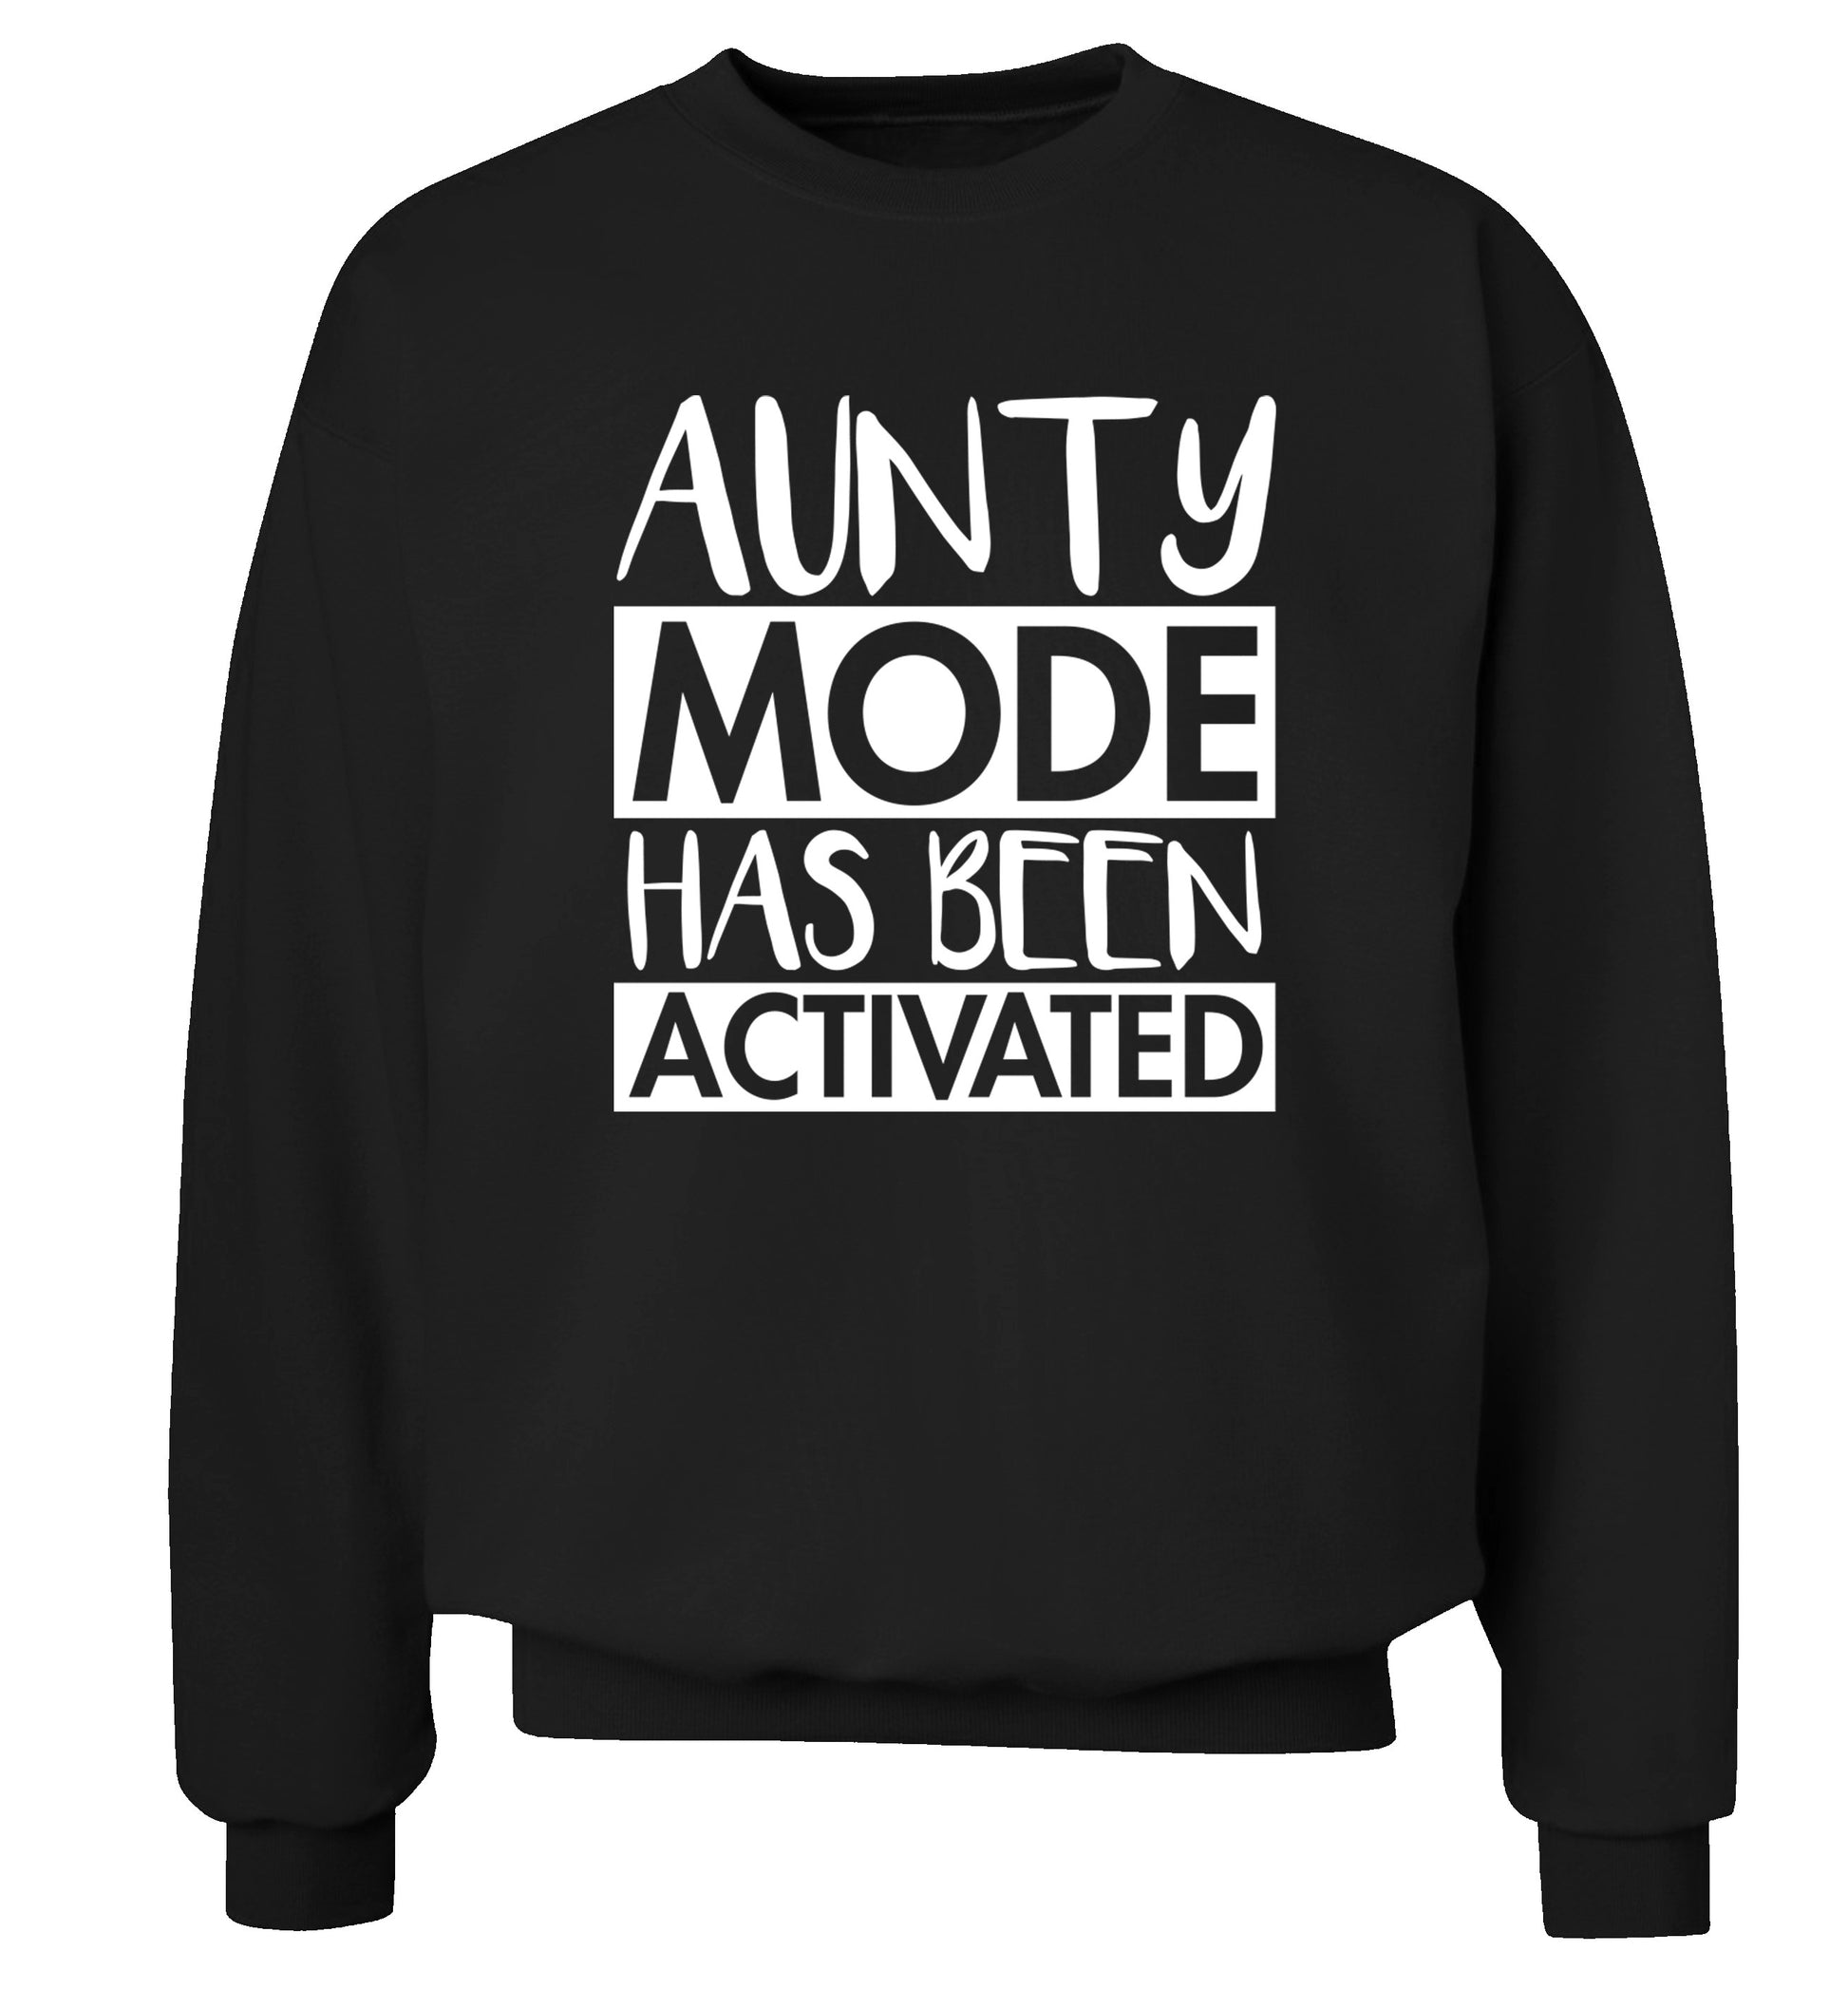 Aunty mode activated Adult's unisex black Sweater 2XL